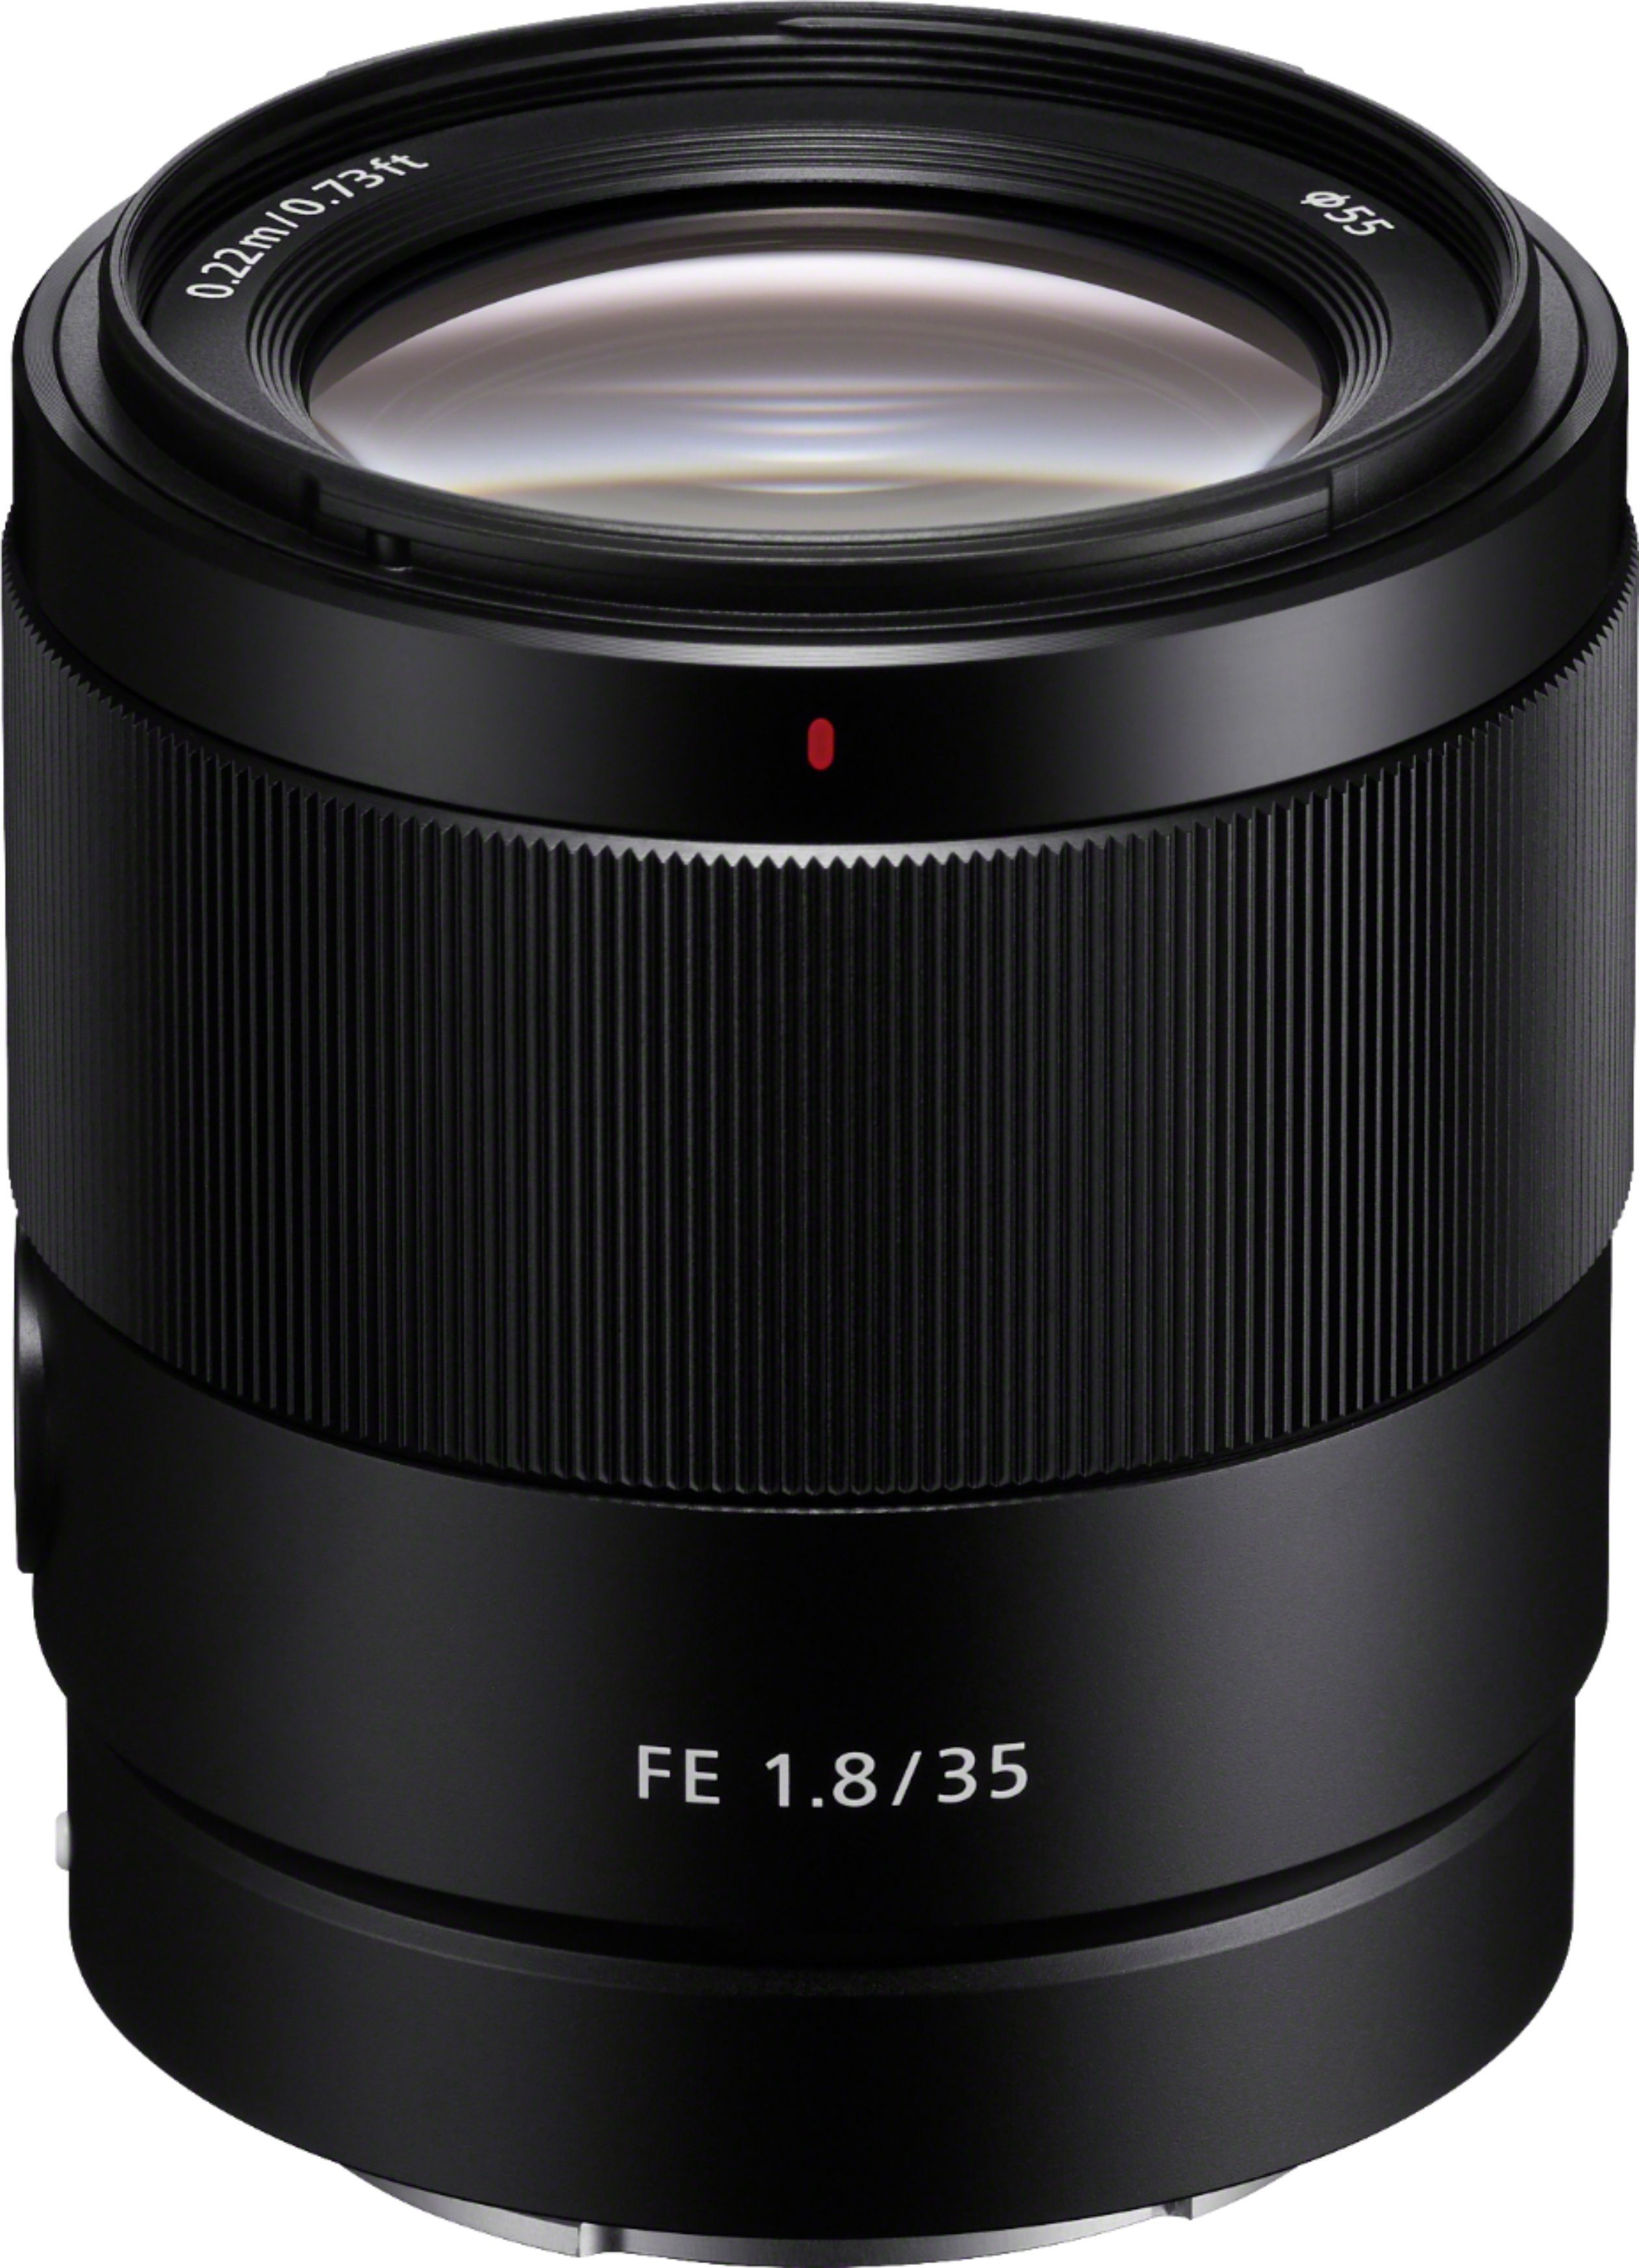 Sony 35mm f/1.8 FE Wide-Angle Lens for Select E-Mount Cameras Black SEL35F18F - Best Buy | Best Buy U.S.